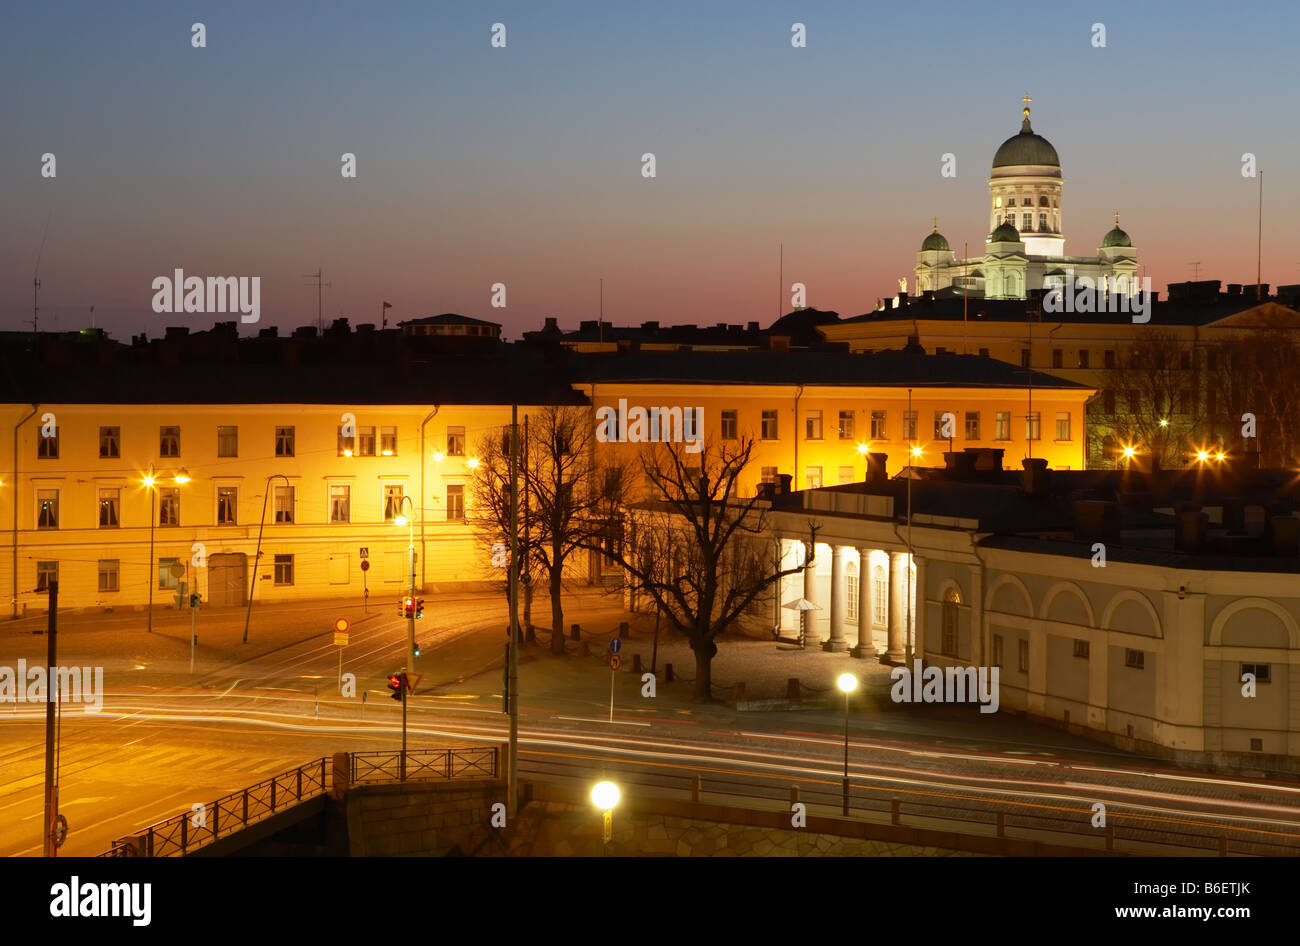 Helsinki skyline and Cathedral at dusk Presidential Palace and Guard Post illuminated in foreground Helsinki Finland Stock Photo